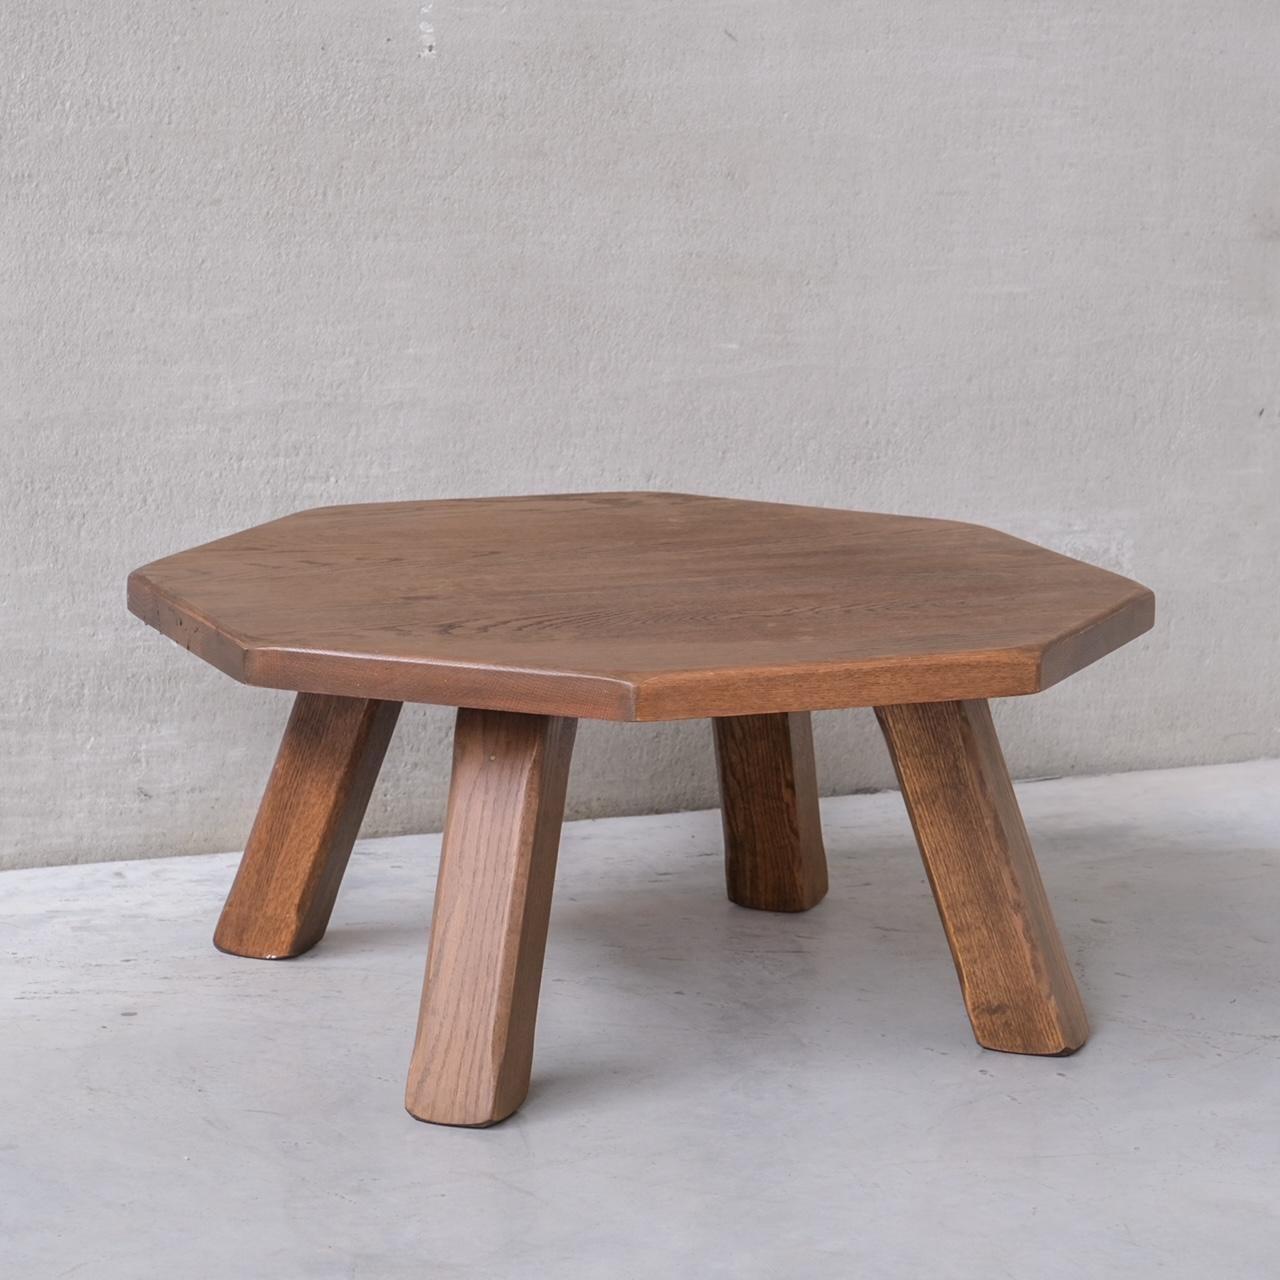 A mid-century almost brutalist style hexagonal coffee table.

Belgium, c1970s.

Raised over four thick legs.

Good condition, the top can be lightly refinished upon request before delivery.

INTERNAL REF: 284/CT006

Location: Belgium